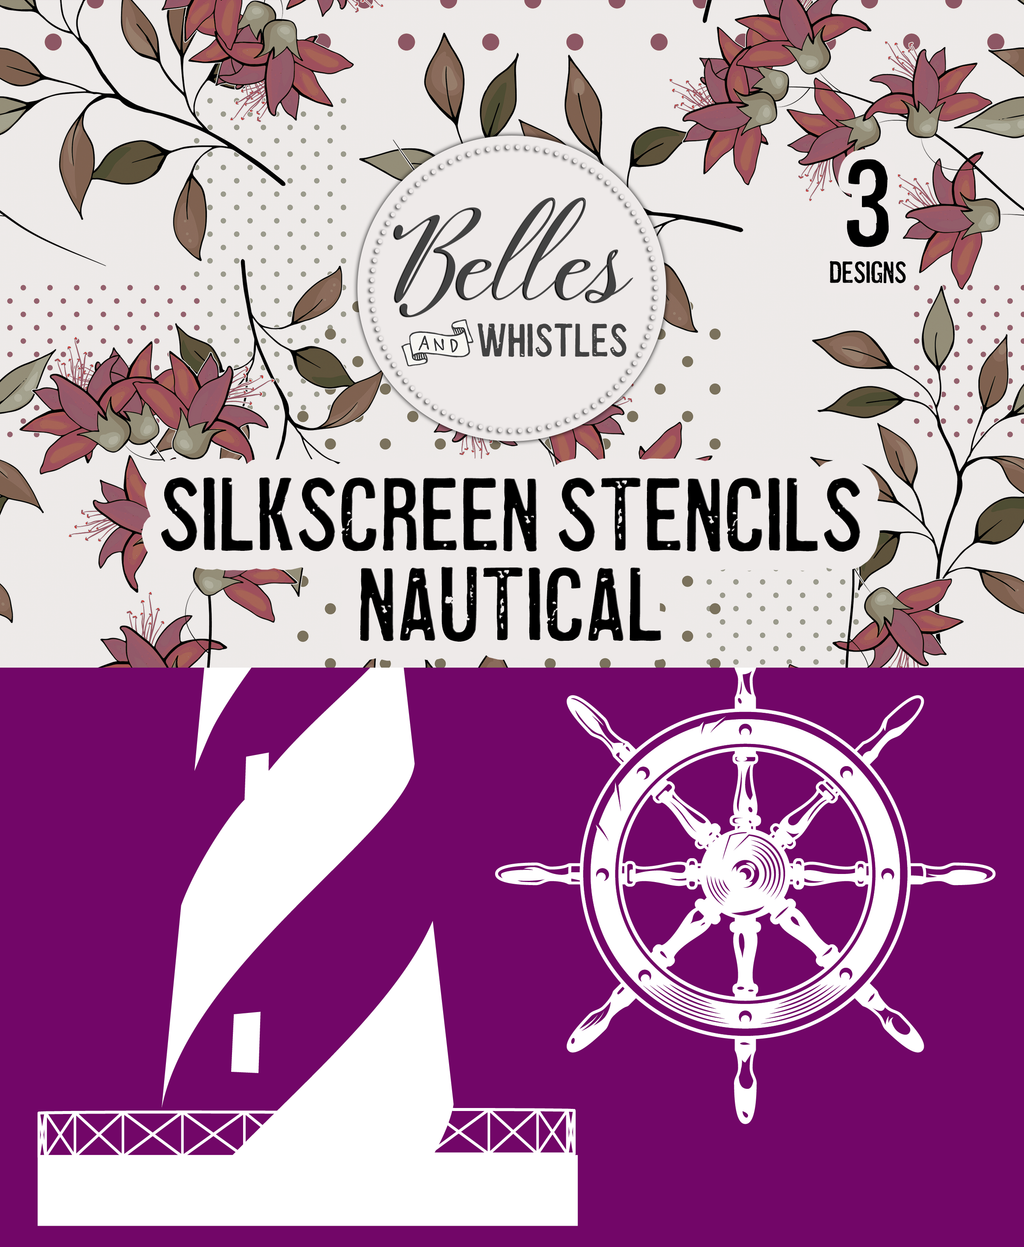 Nautical Silkscreen Stencil Package - Belles And Whistles